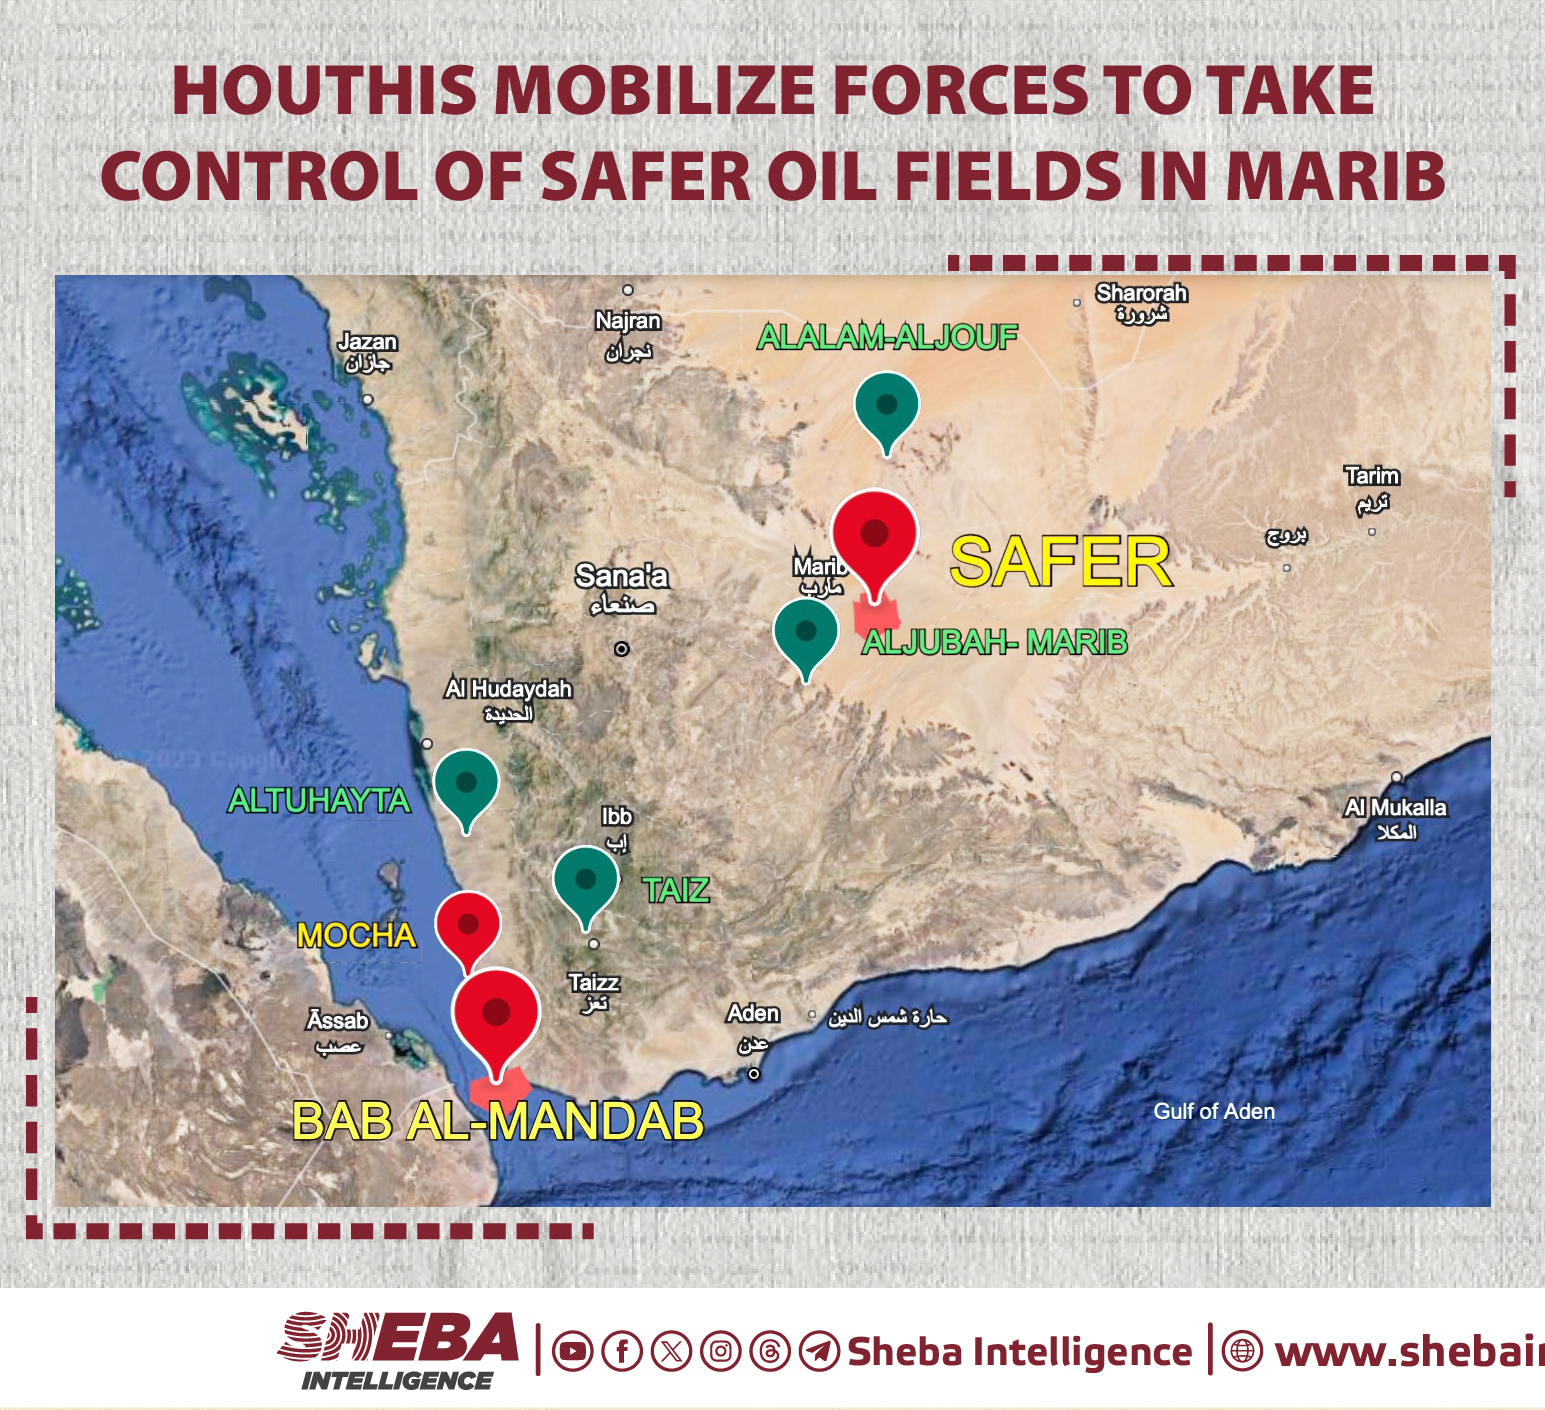 Houthis Mobilize Forces to Take Control of Safer Oil Fields in Marib